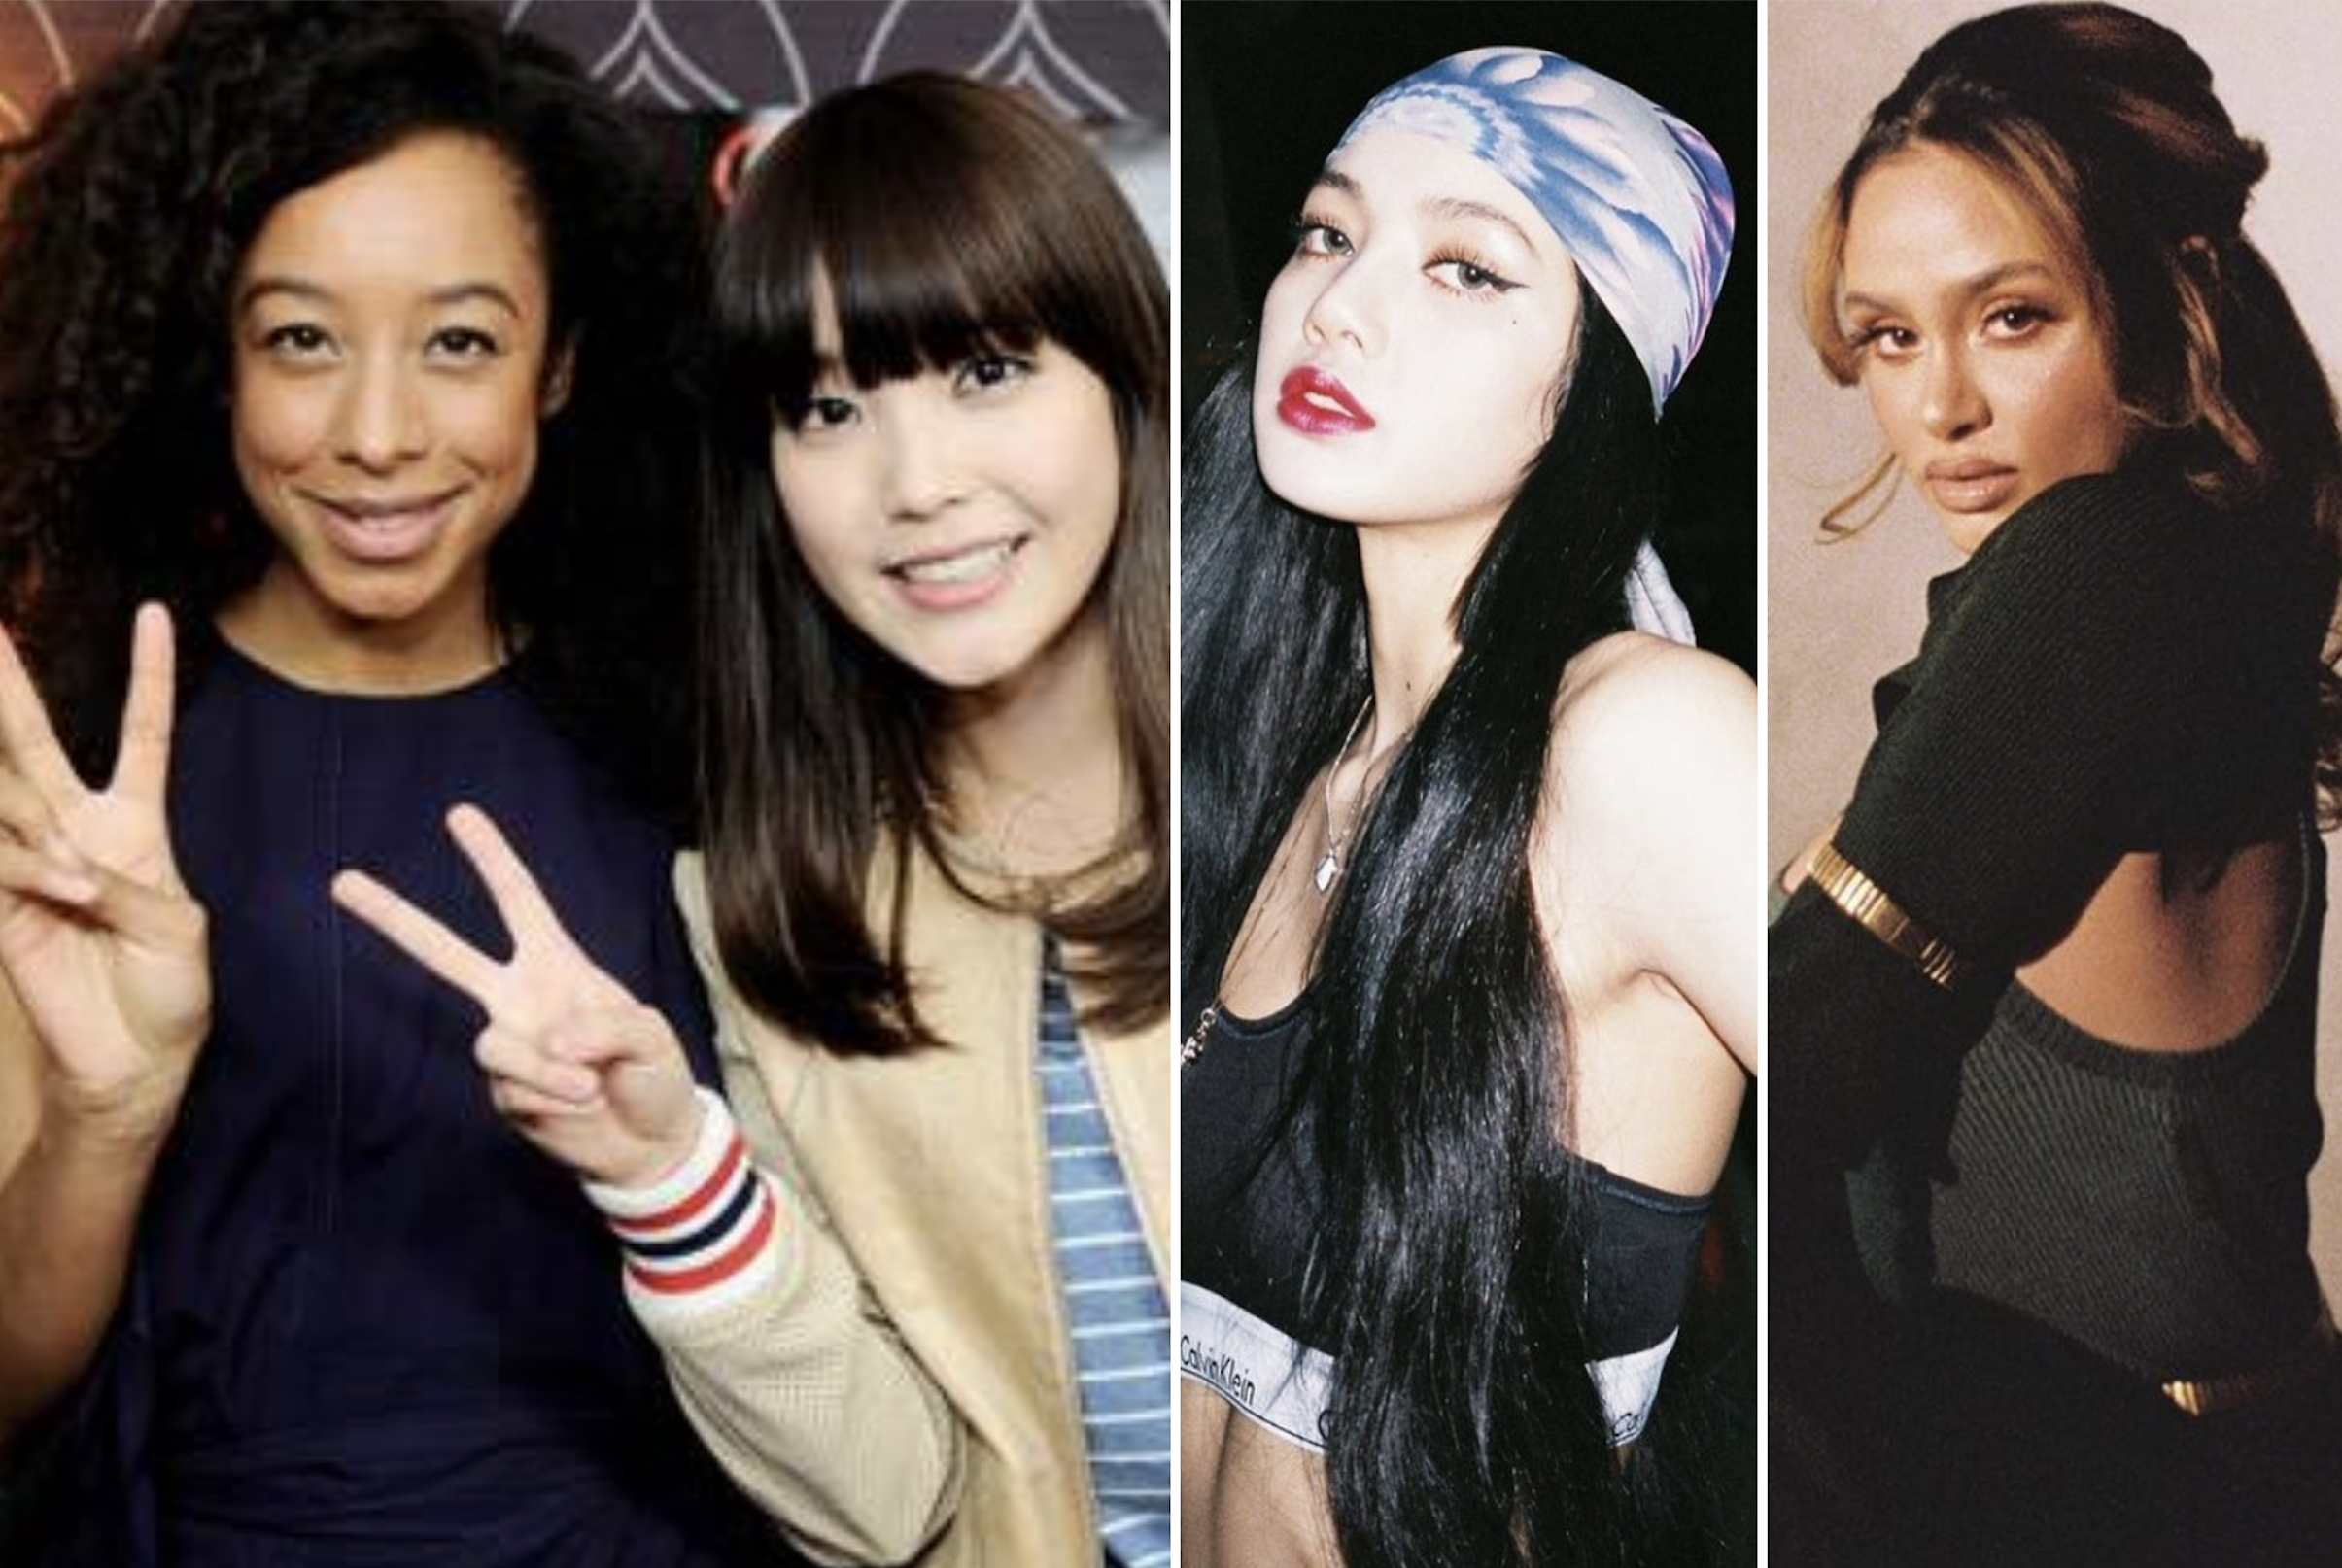 IU fan girling with Corinne Bailey Rae, and Blackpink’s Lisa and Kehlani – might we see a collab soon? Photo: @Koreaboo/Twitter; @lalalisa_m @kehlani/ Instagram